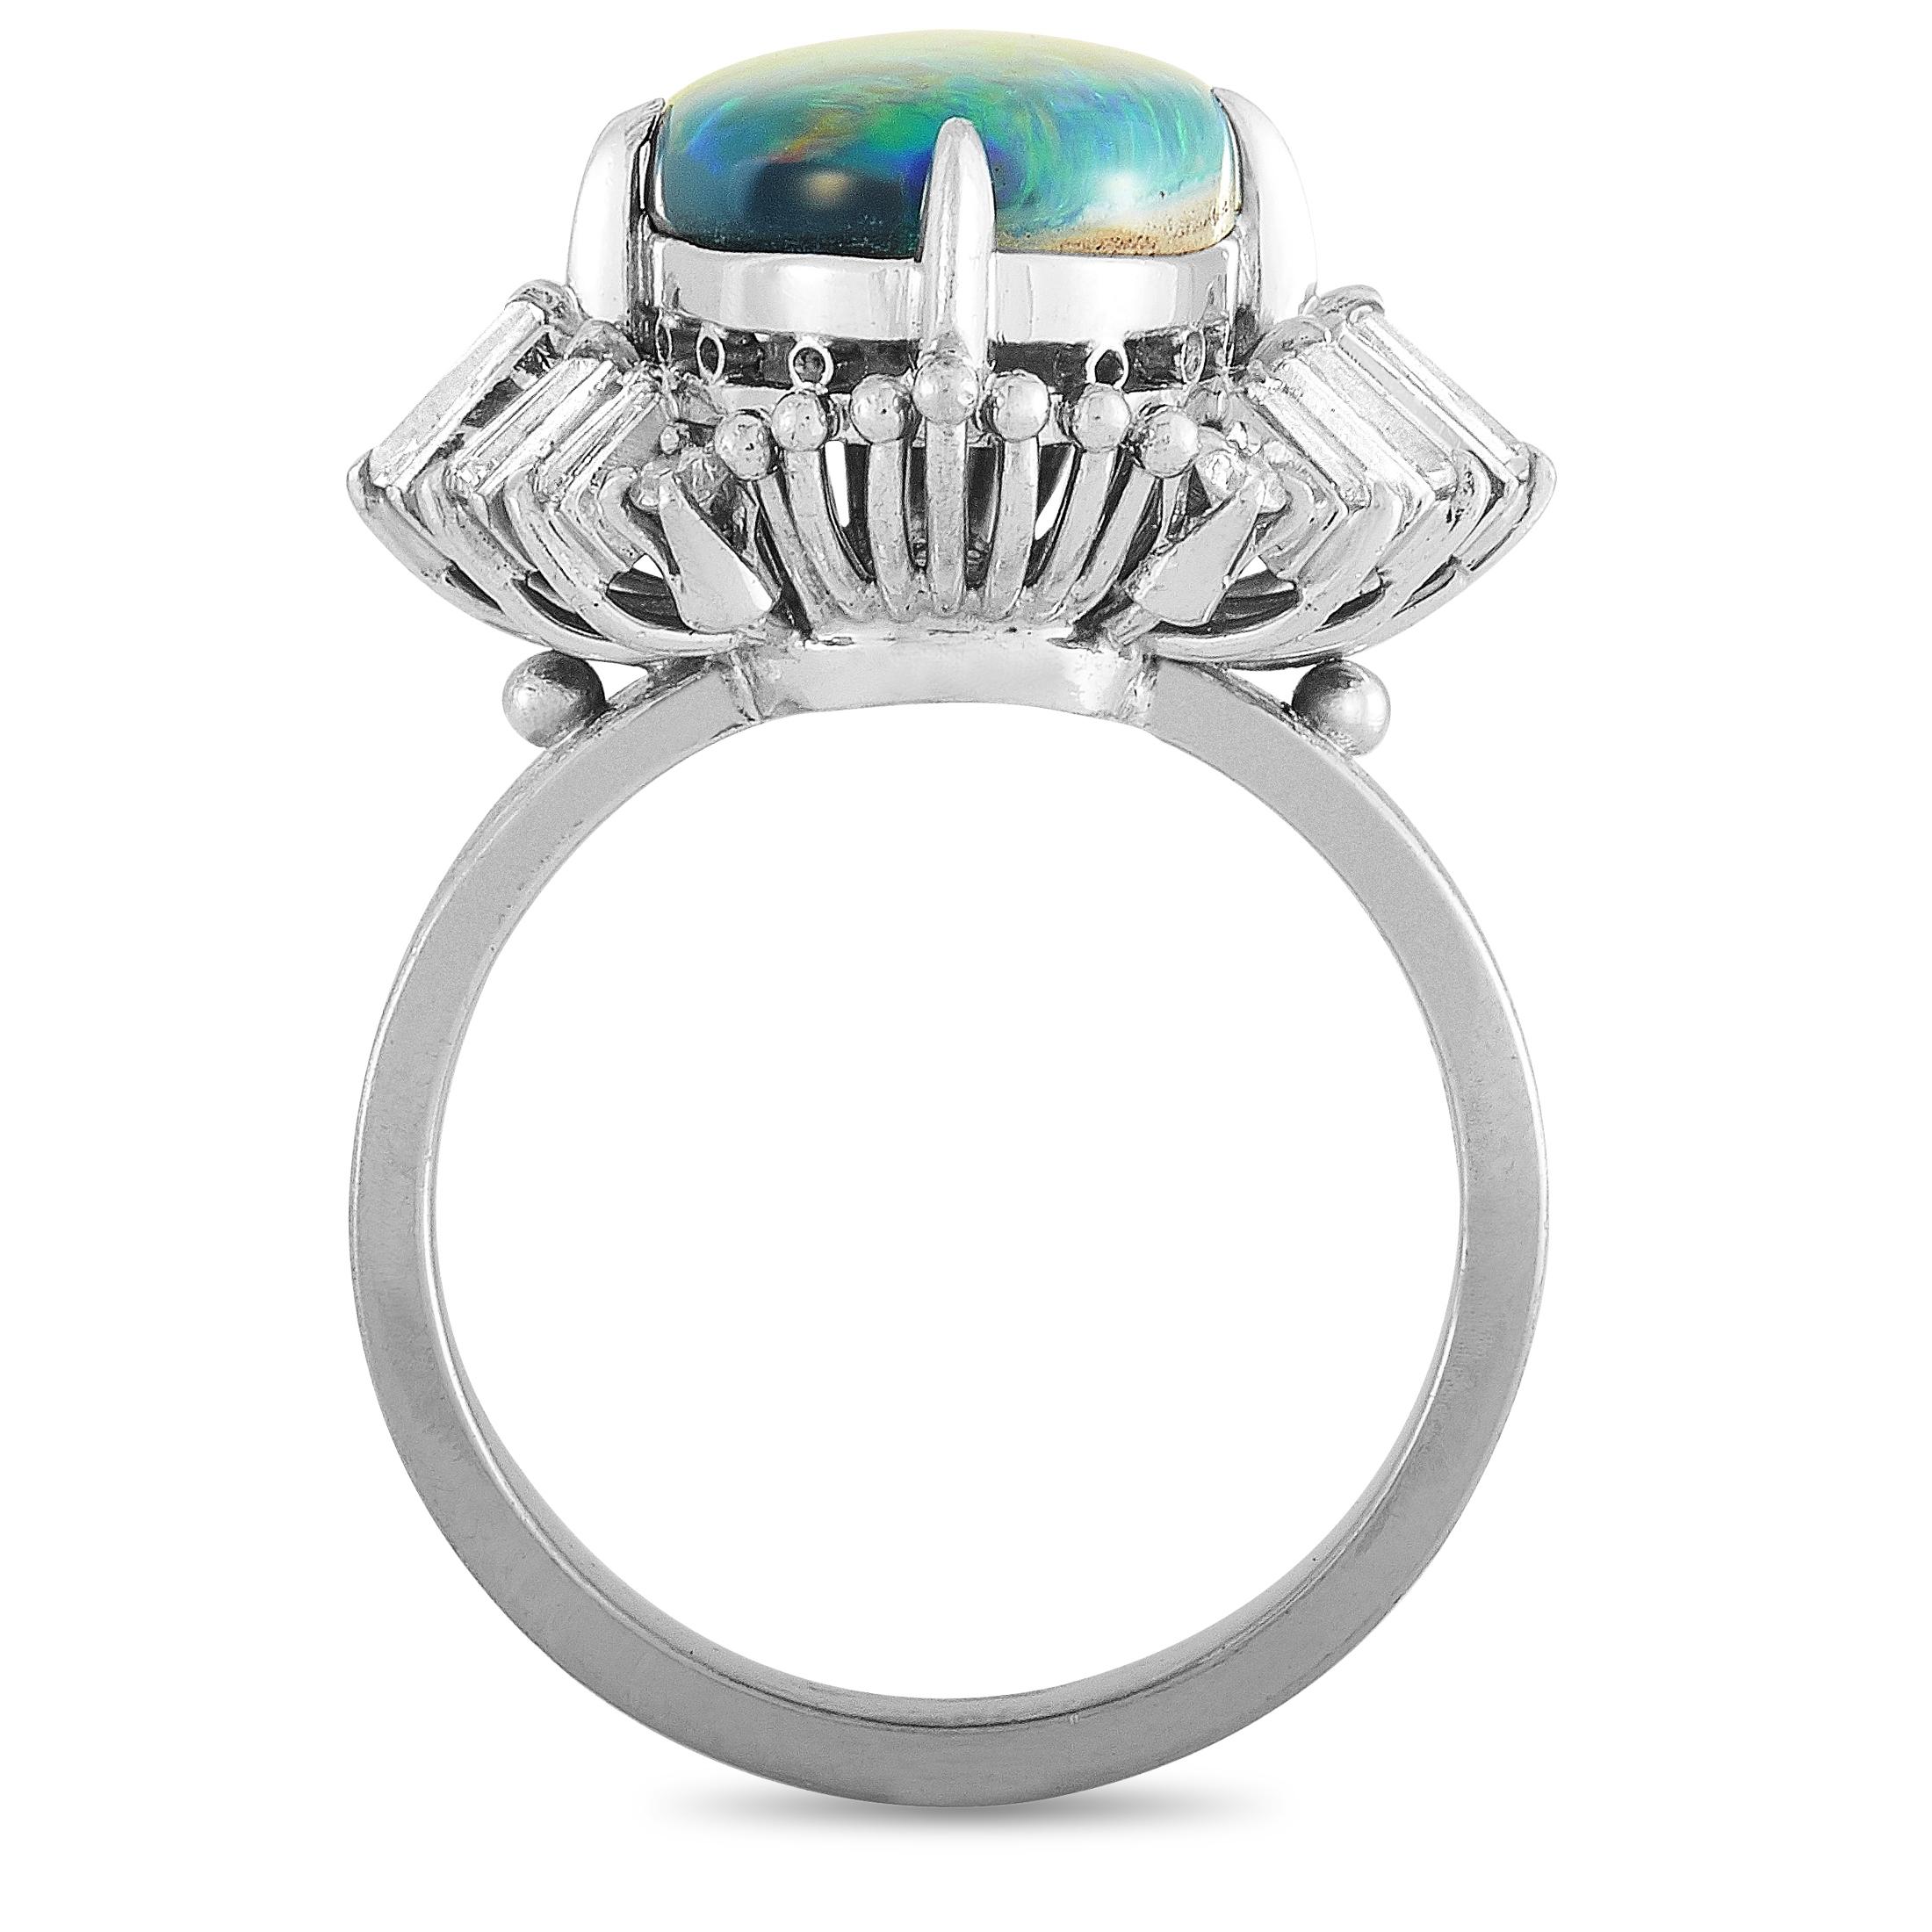 This LB Exclusive ring is made of platinum and set with a 4.37 ct opal and a total of 0.67 carats of diamonds. The ring weighs 10.6 grams, boasting band thickness of 3 mm and top height of 10 mm, while top dimensions measure 20 by 18 mm.
 
 Offered